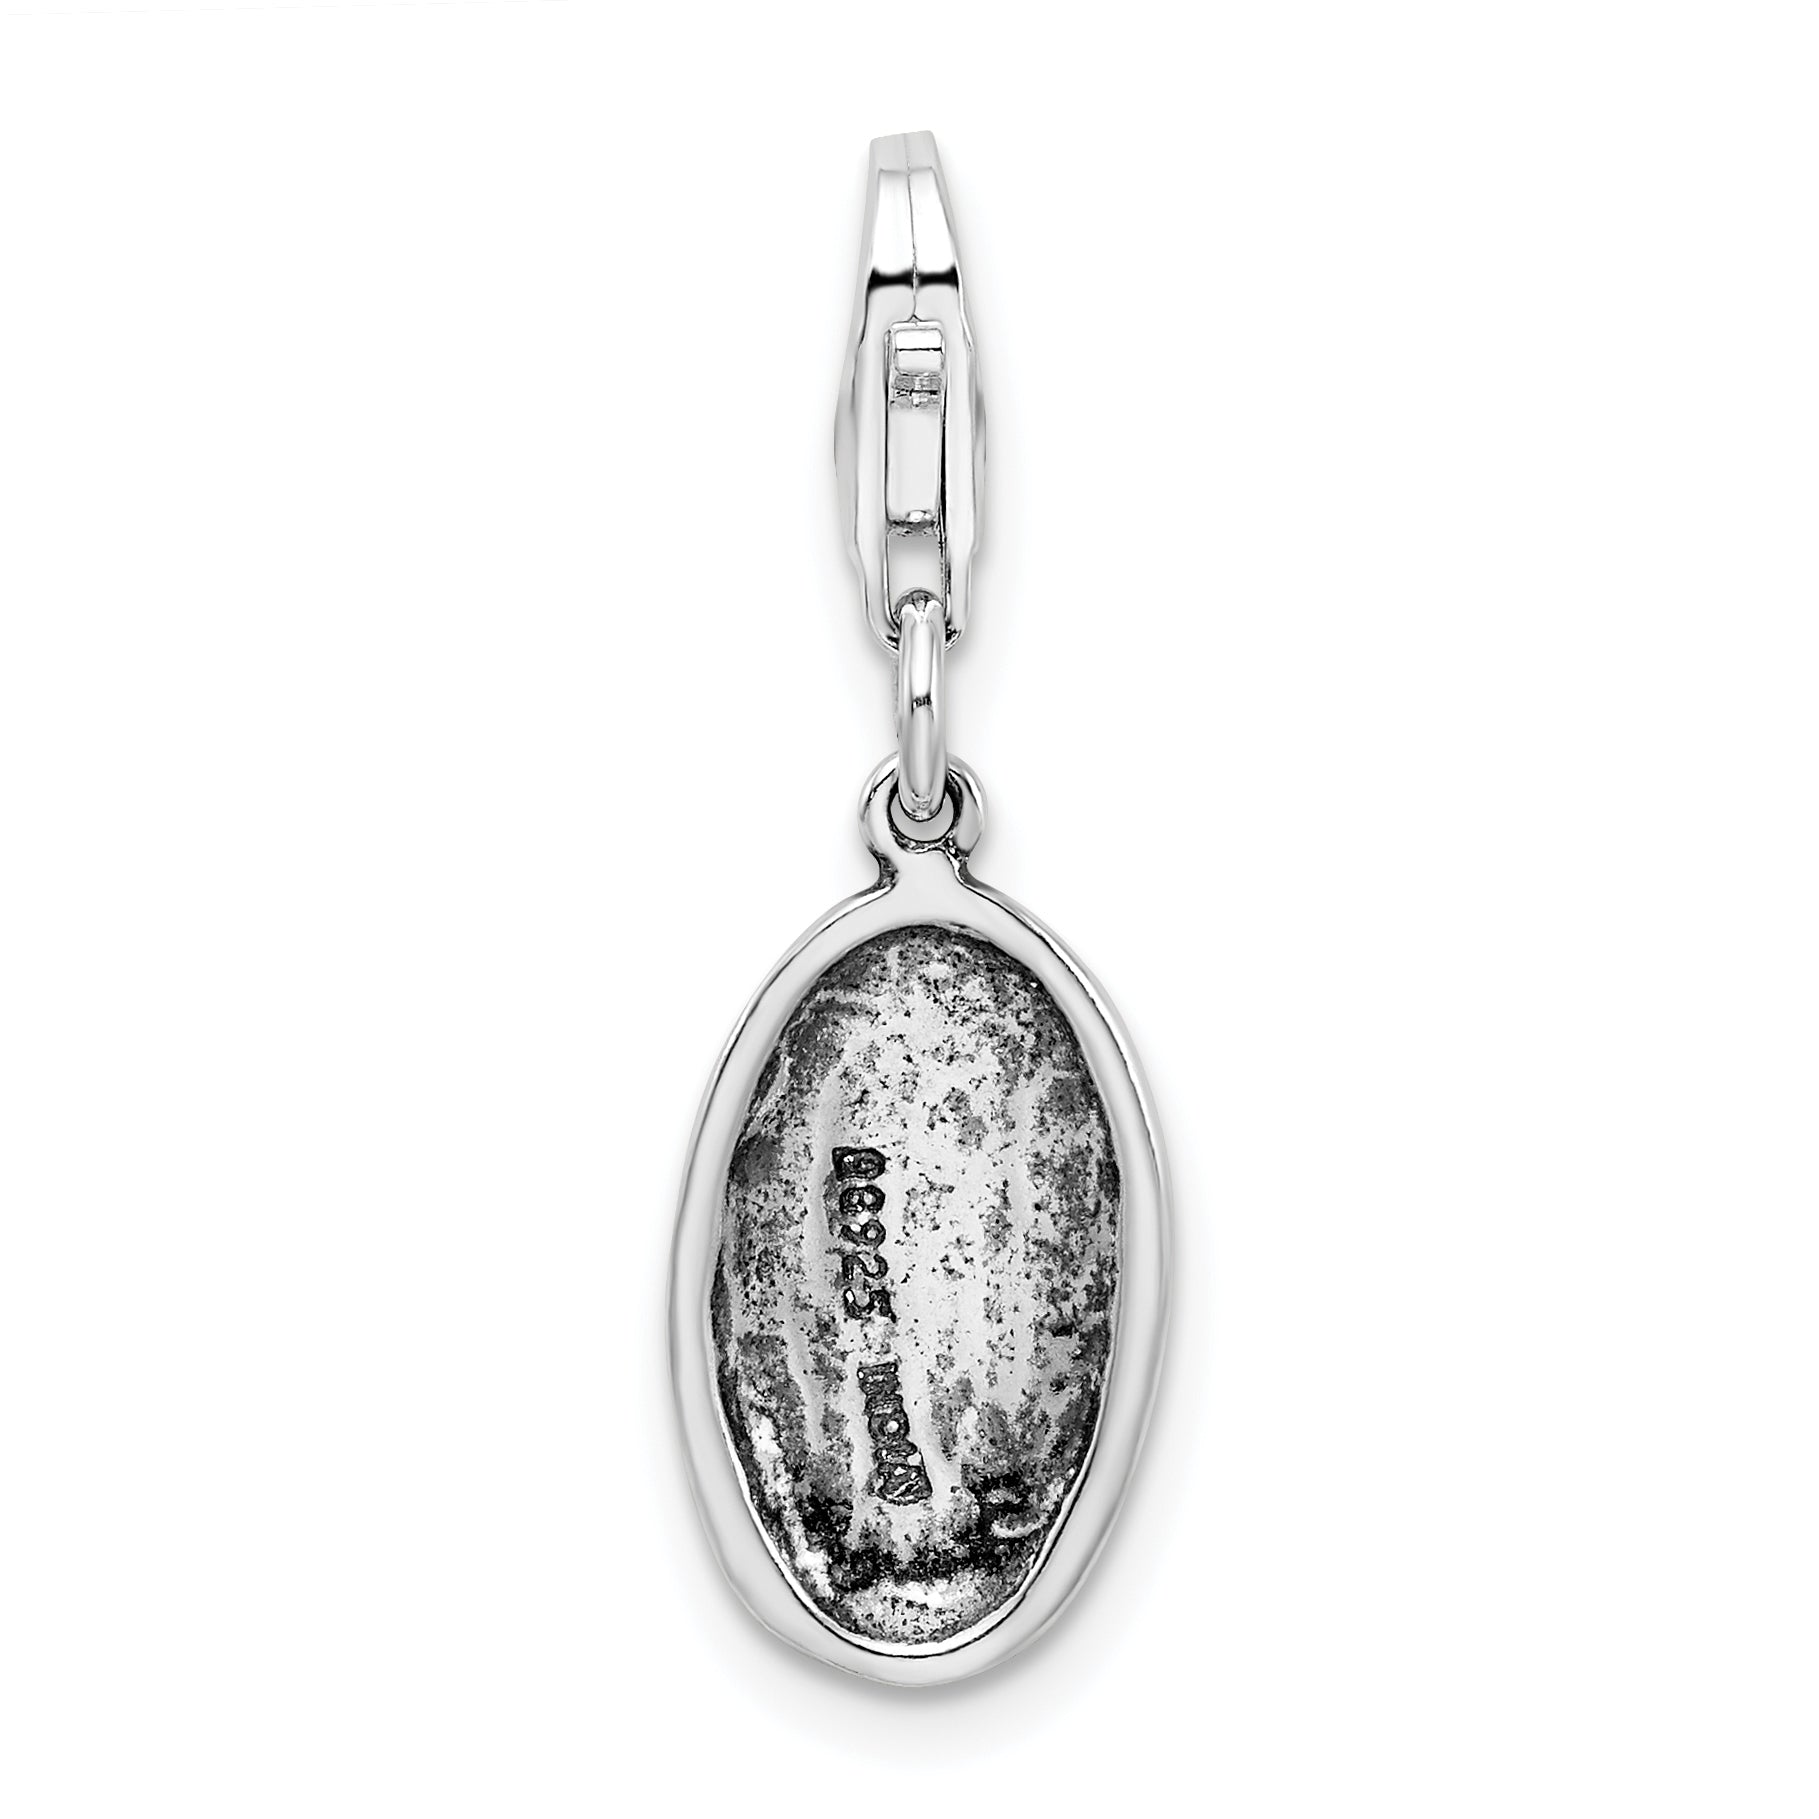 Amore La Vita Sterling Silver Rhodium-plated Polished Antiqued STRENGTH Charm with Fancy Lobster Clasp